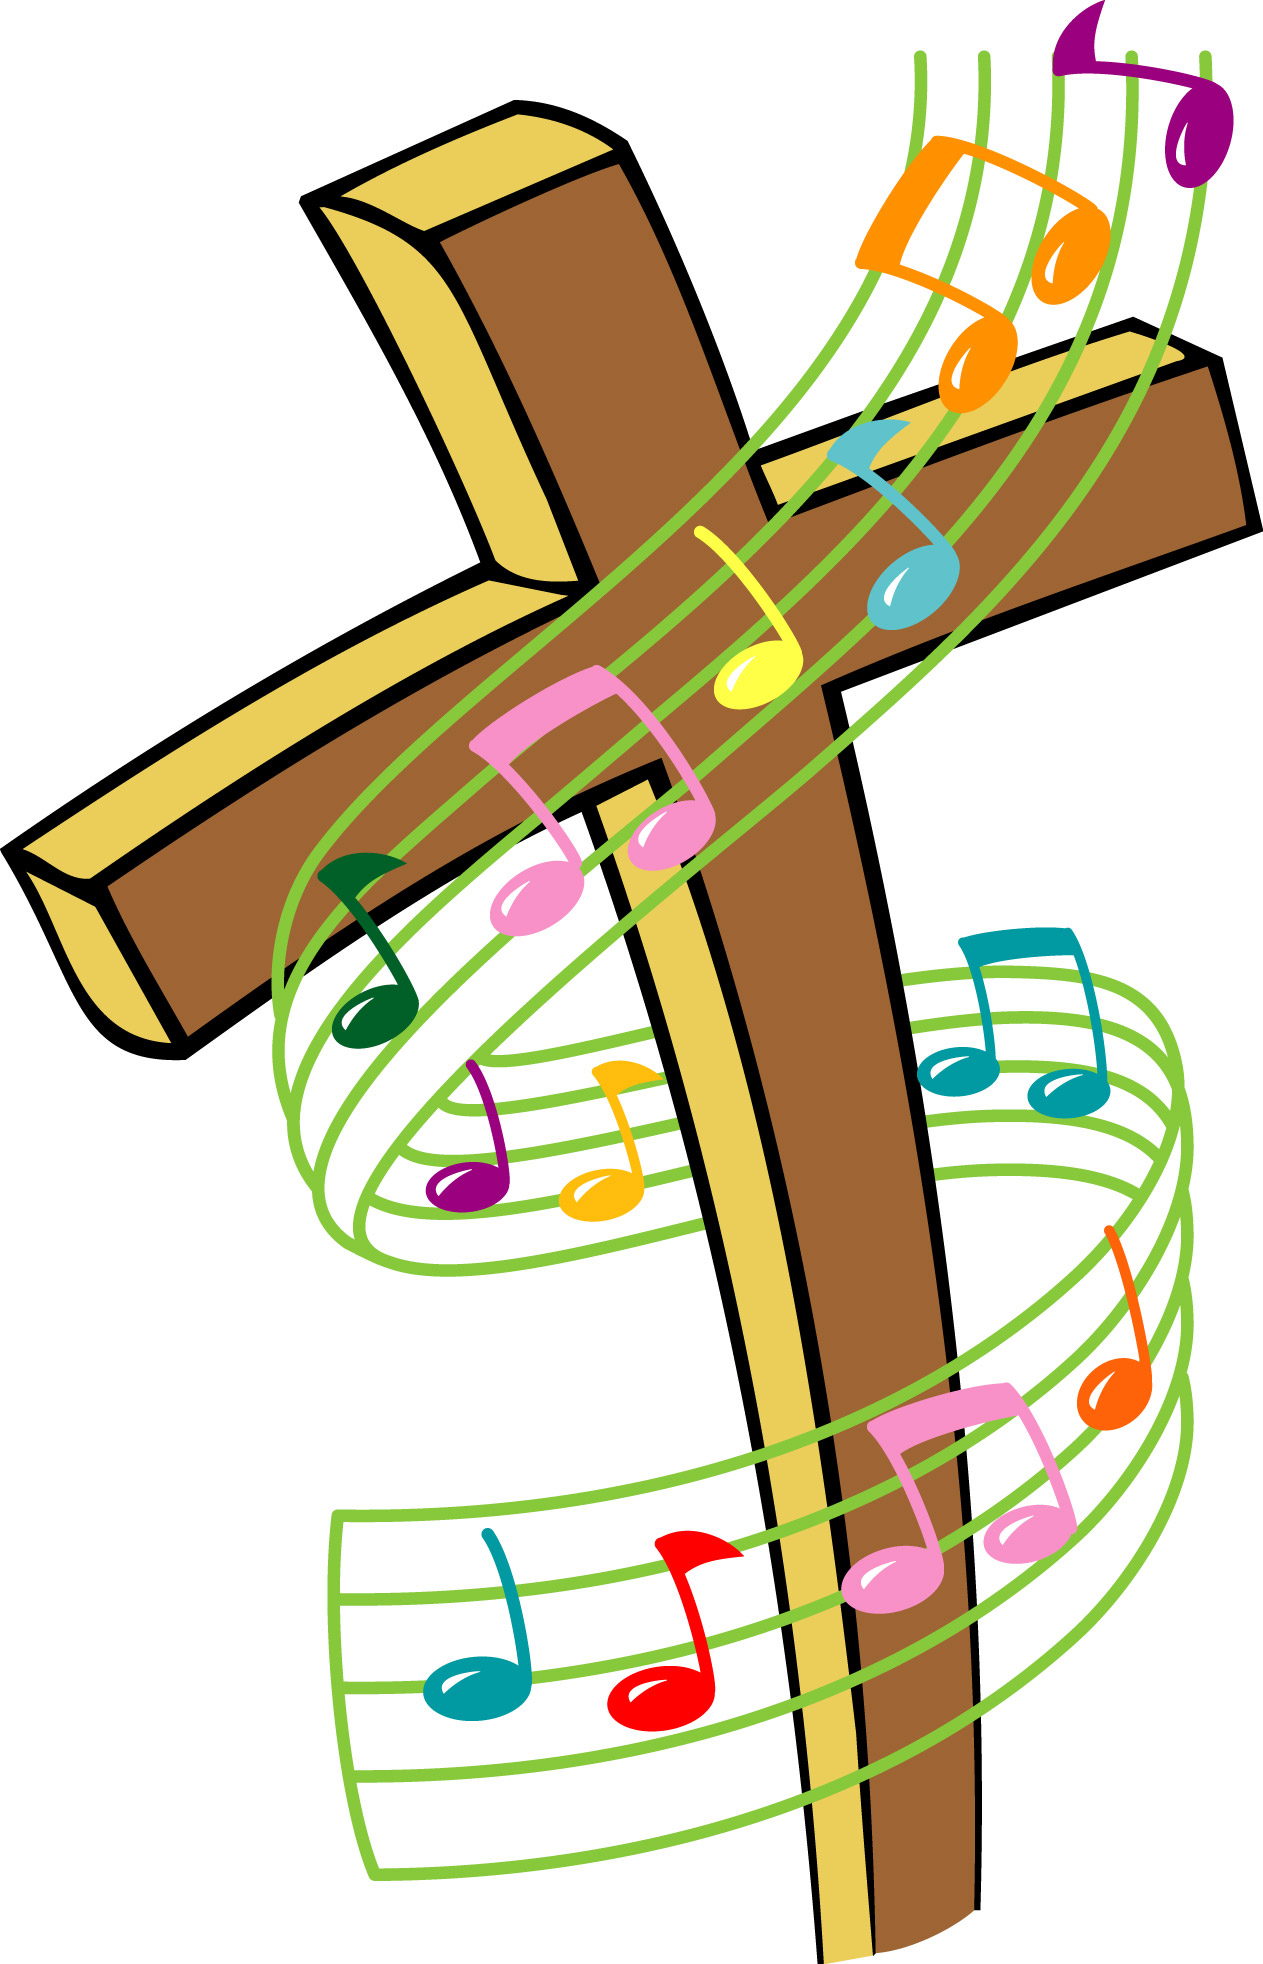 rainbow colored musical staff loosly wound around a cross